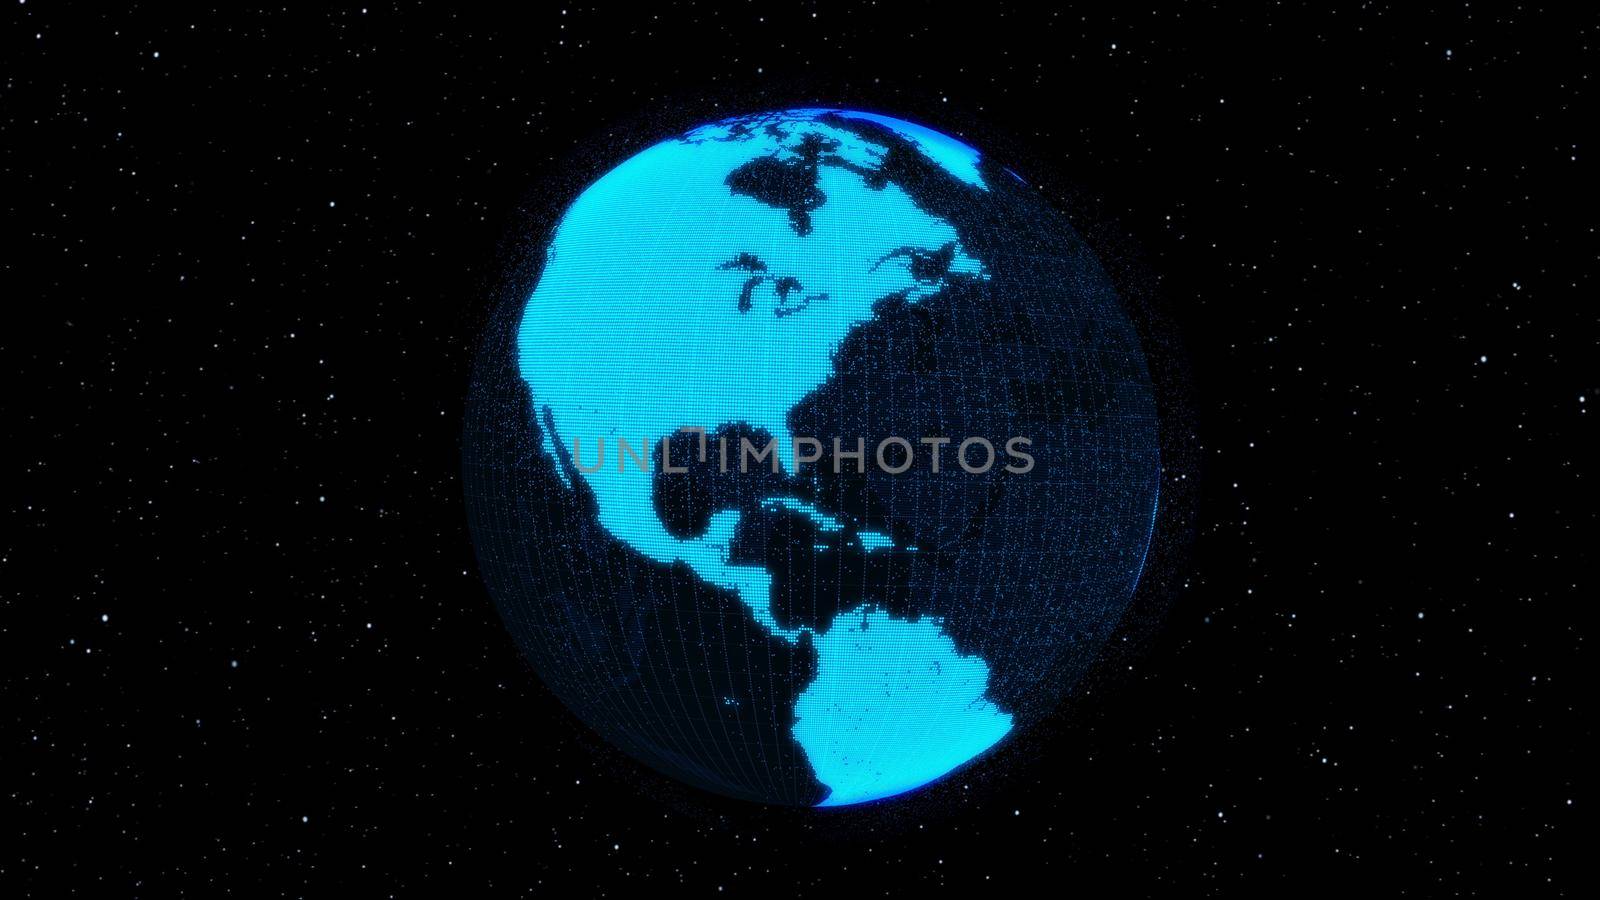 3D Digital orbital earth in cyberspace showing concept of network technology by biancoblue